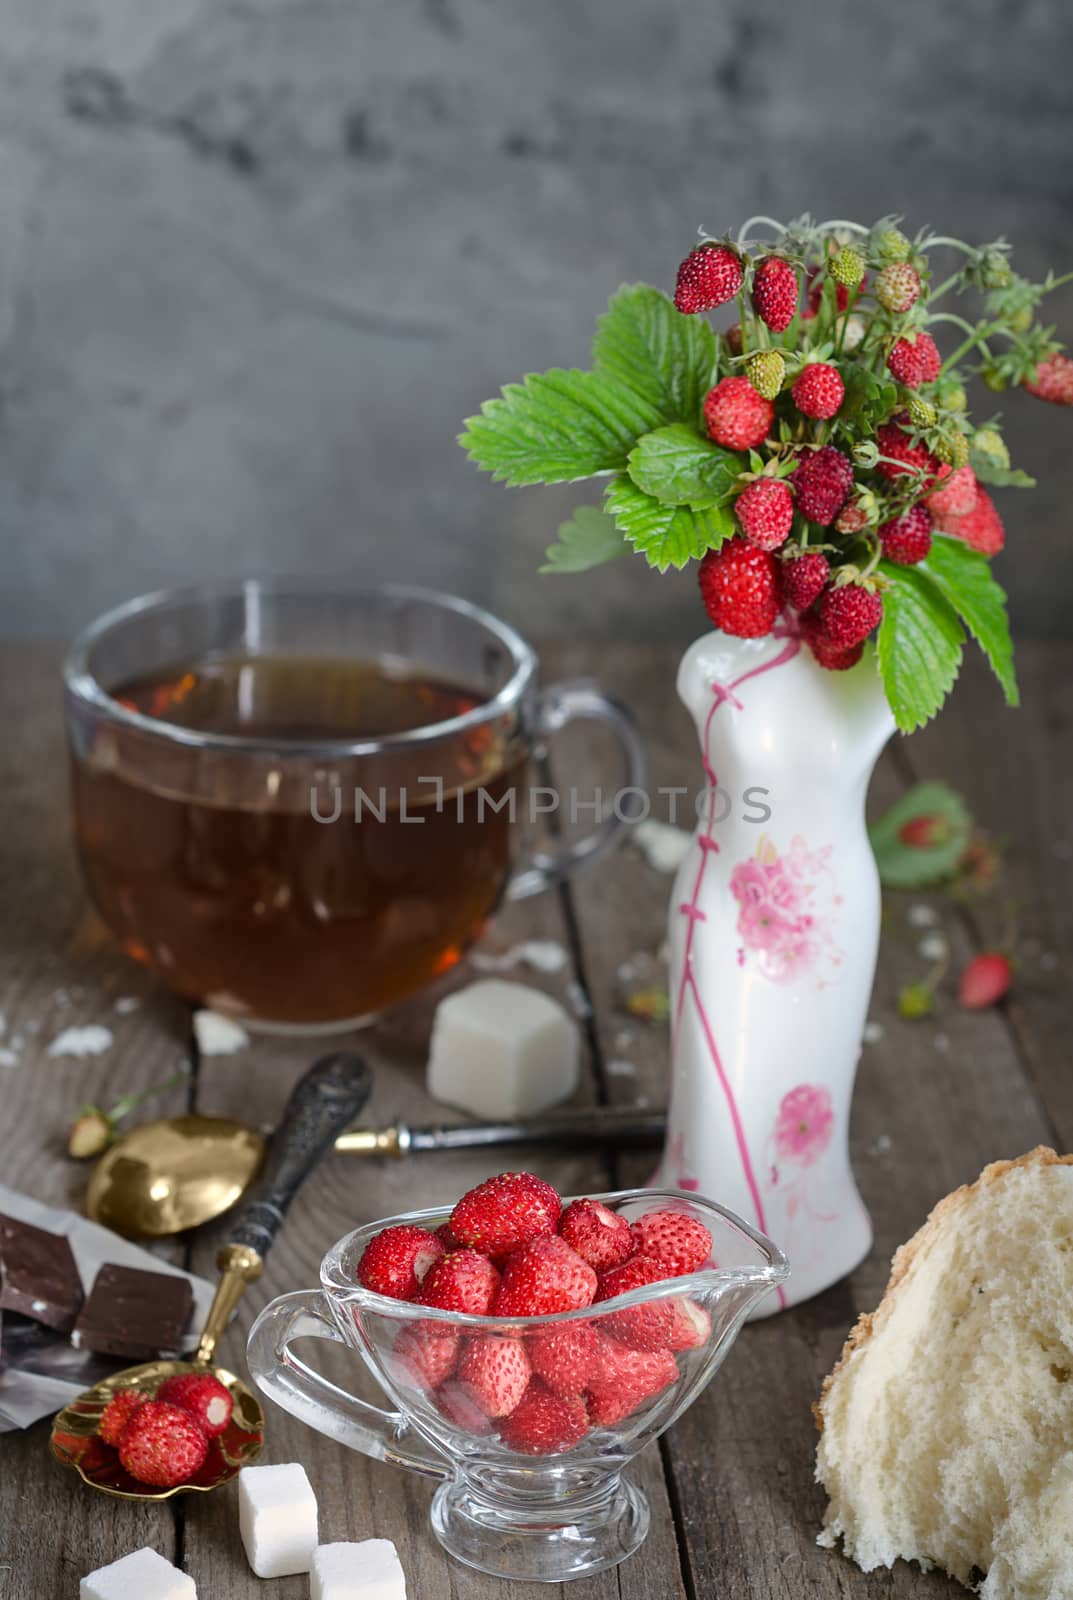 The strawberries on the table and tea by Gaina